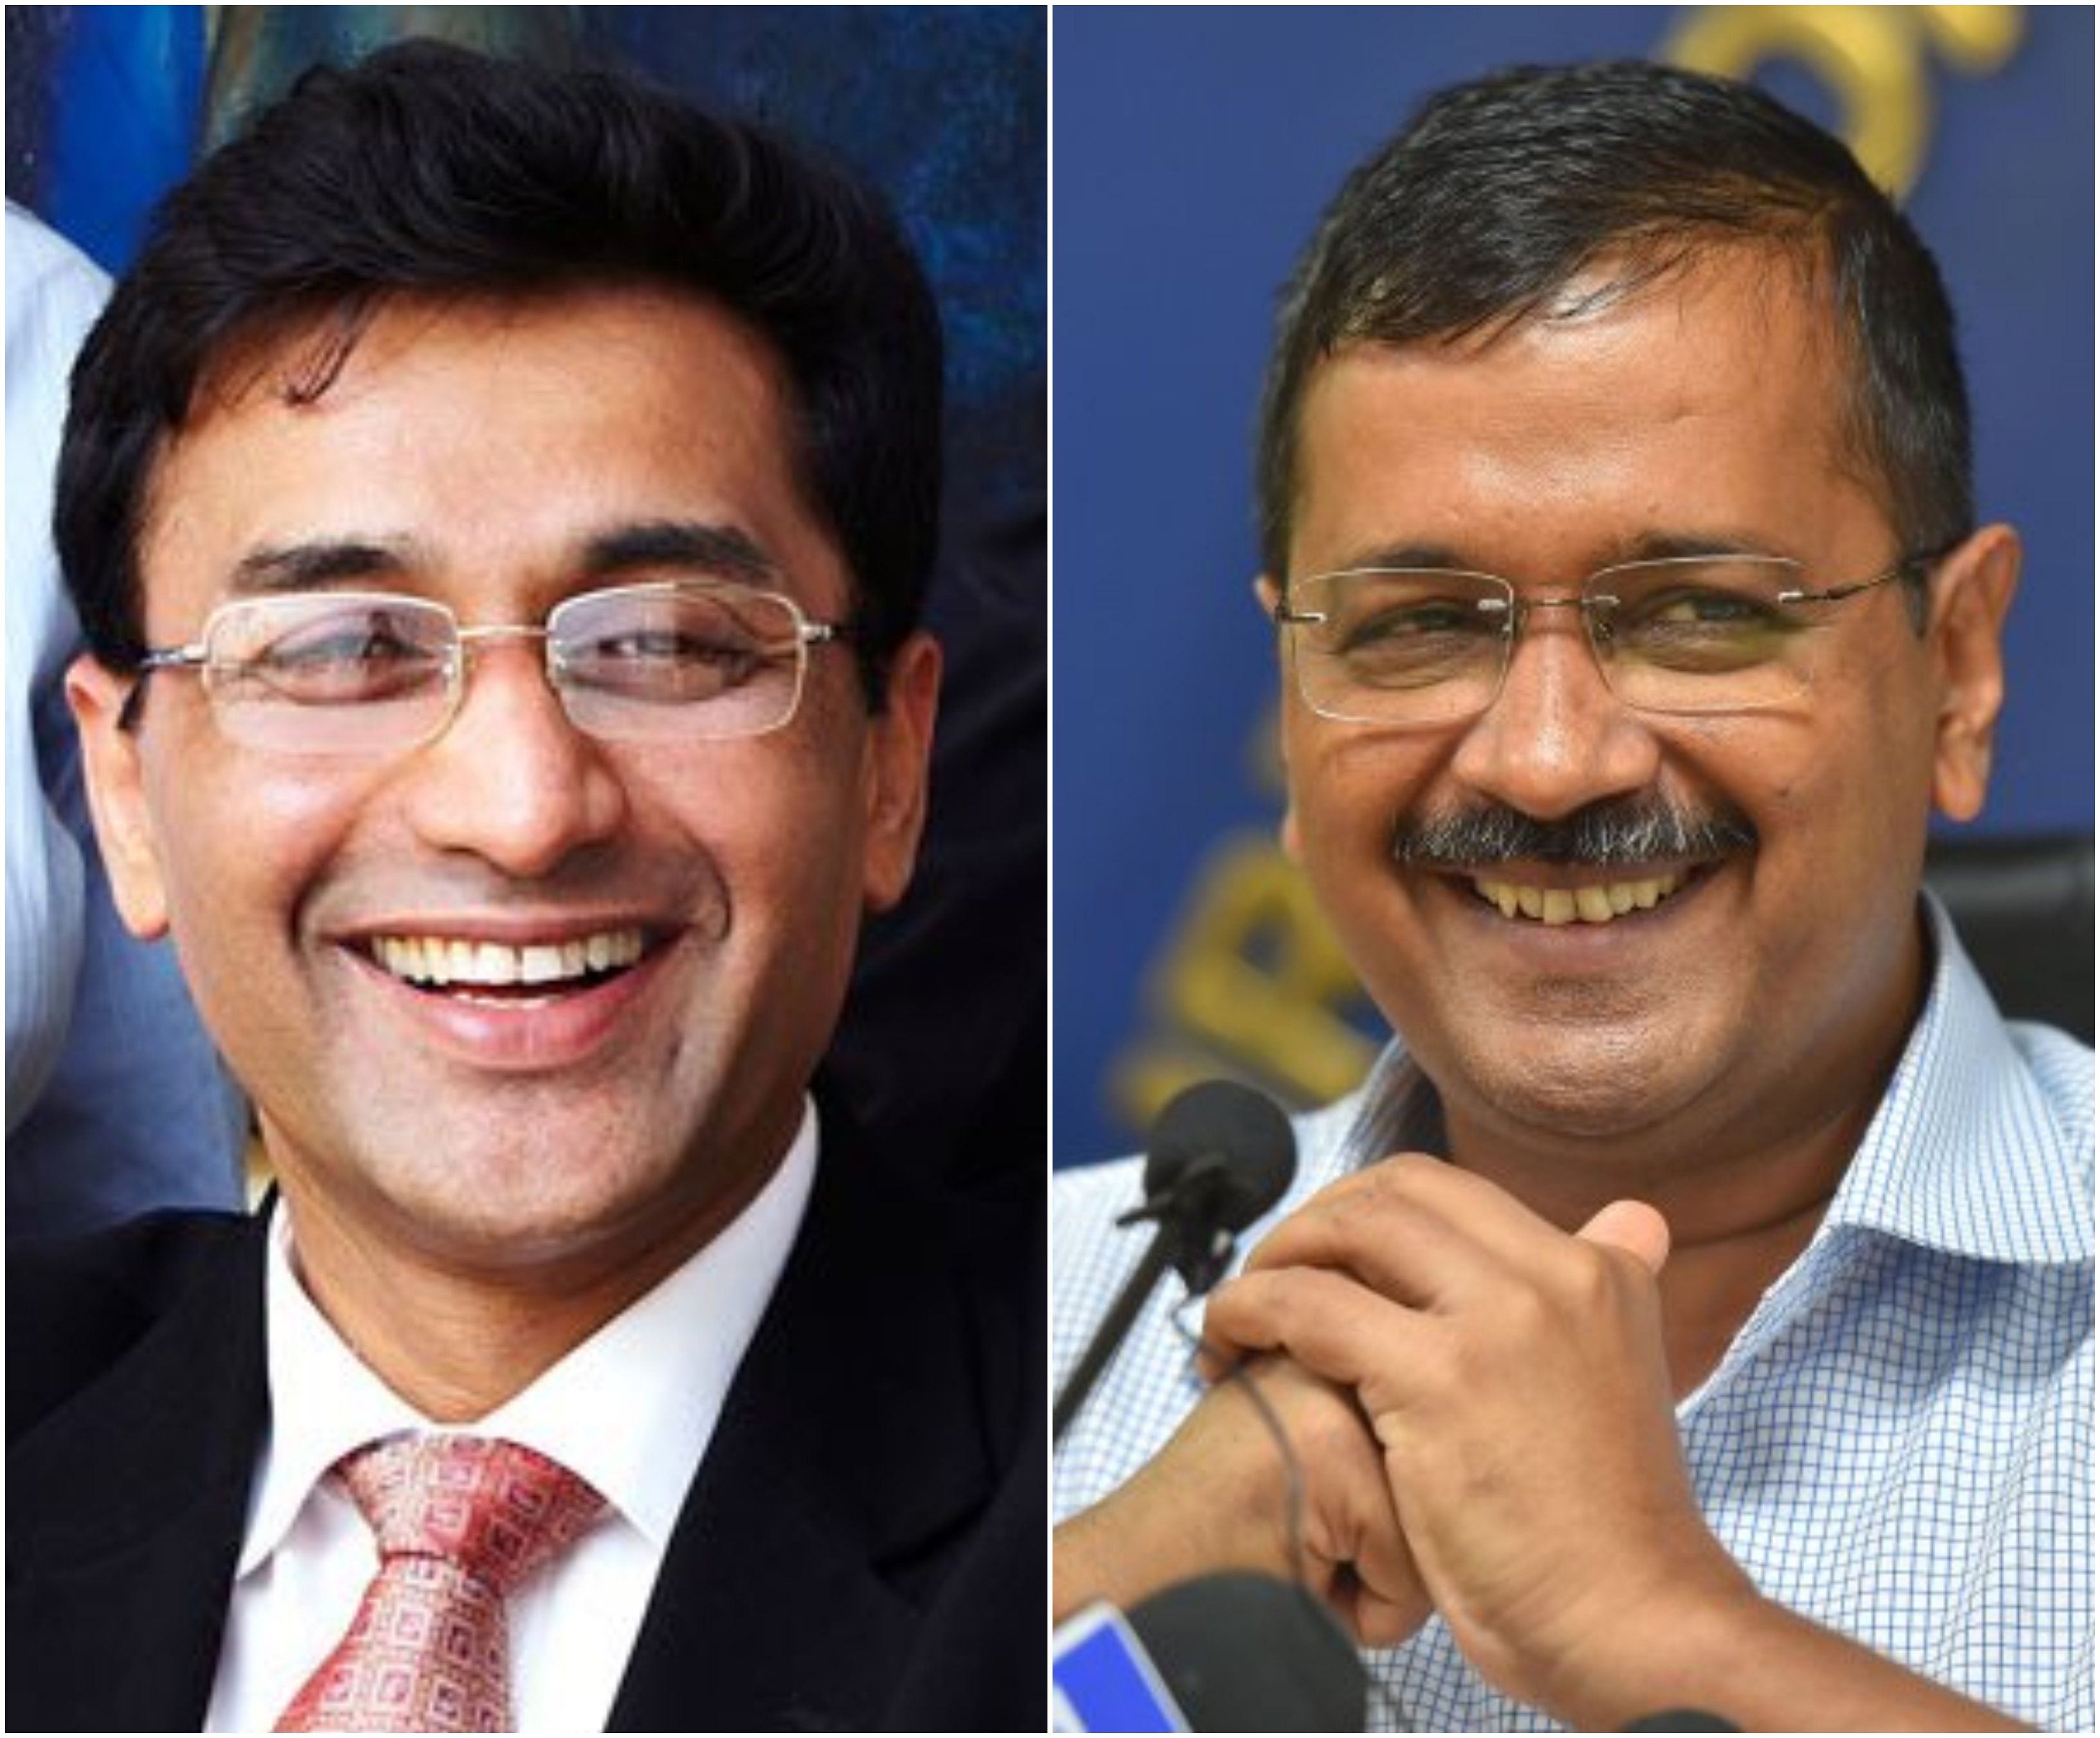 Both Lok Sabha member from Jamshedpur, Dr Ajoy Kumar and Delhi Chief Minister Arvind Kejriwal qualified UPSC examination, quit as civil servants, worked for Tata groups and eventually became full-time politicians. 